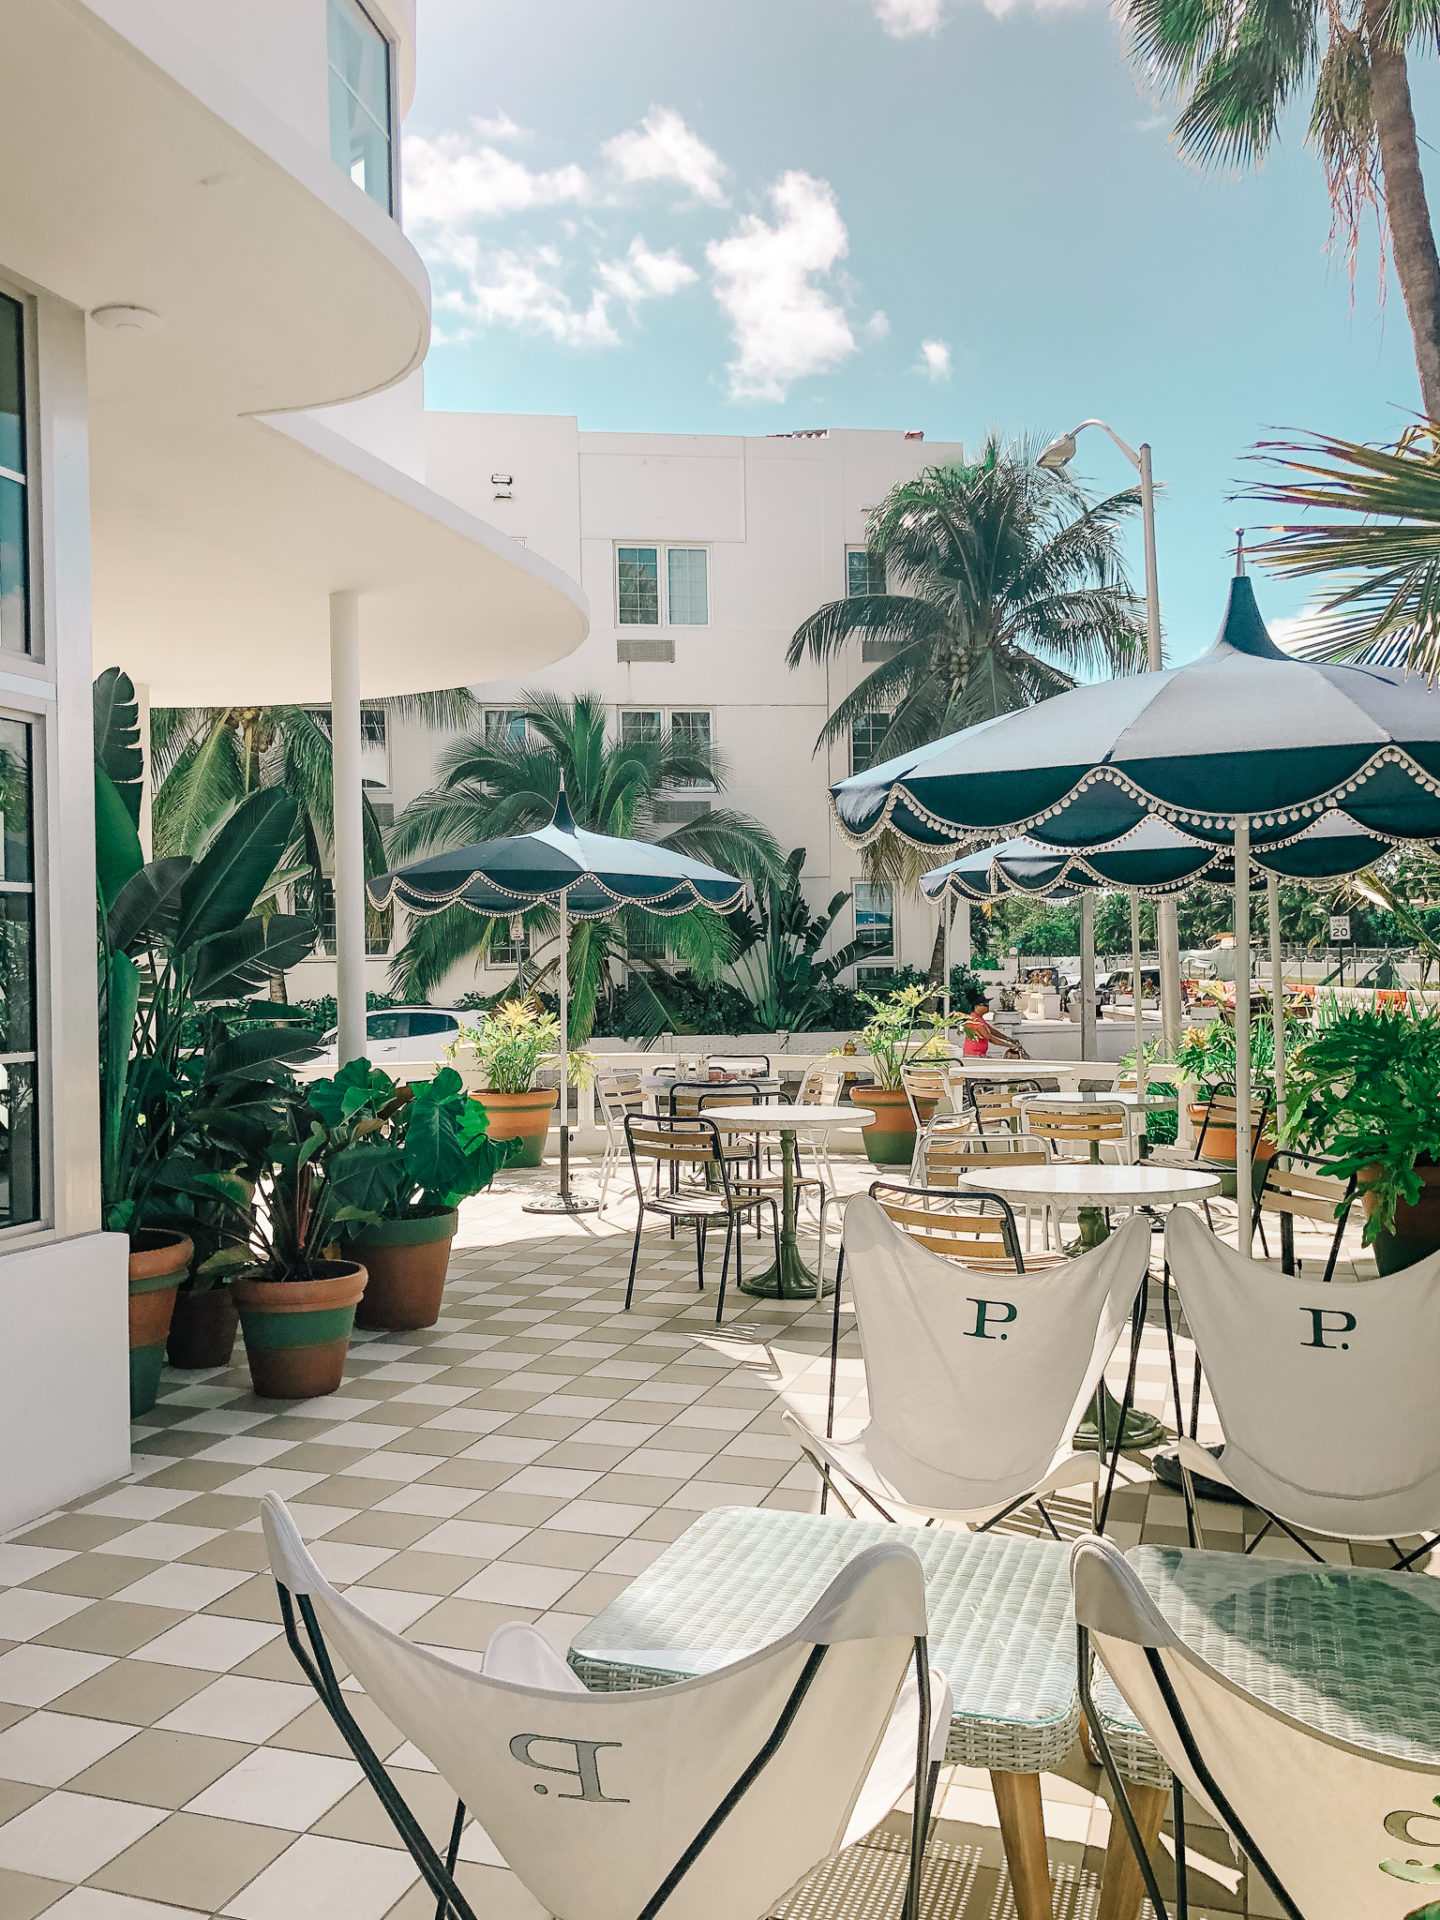 A Weekend At Palihouse Miami Beach | The Kennedy Curate